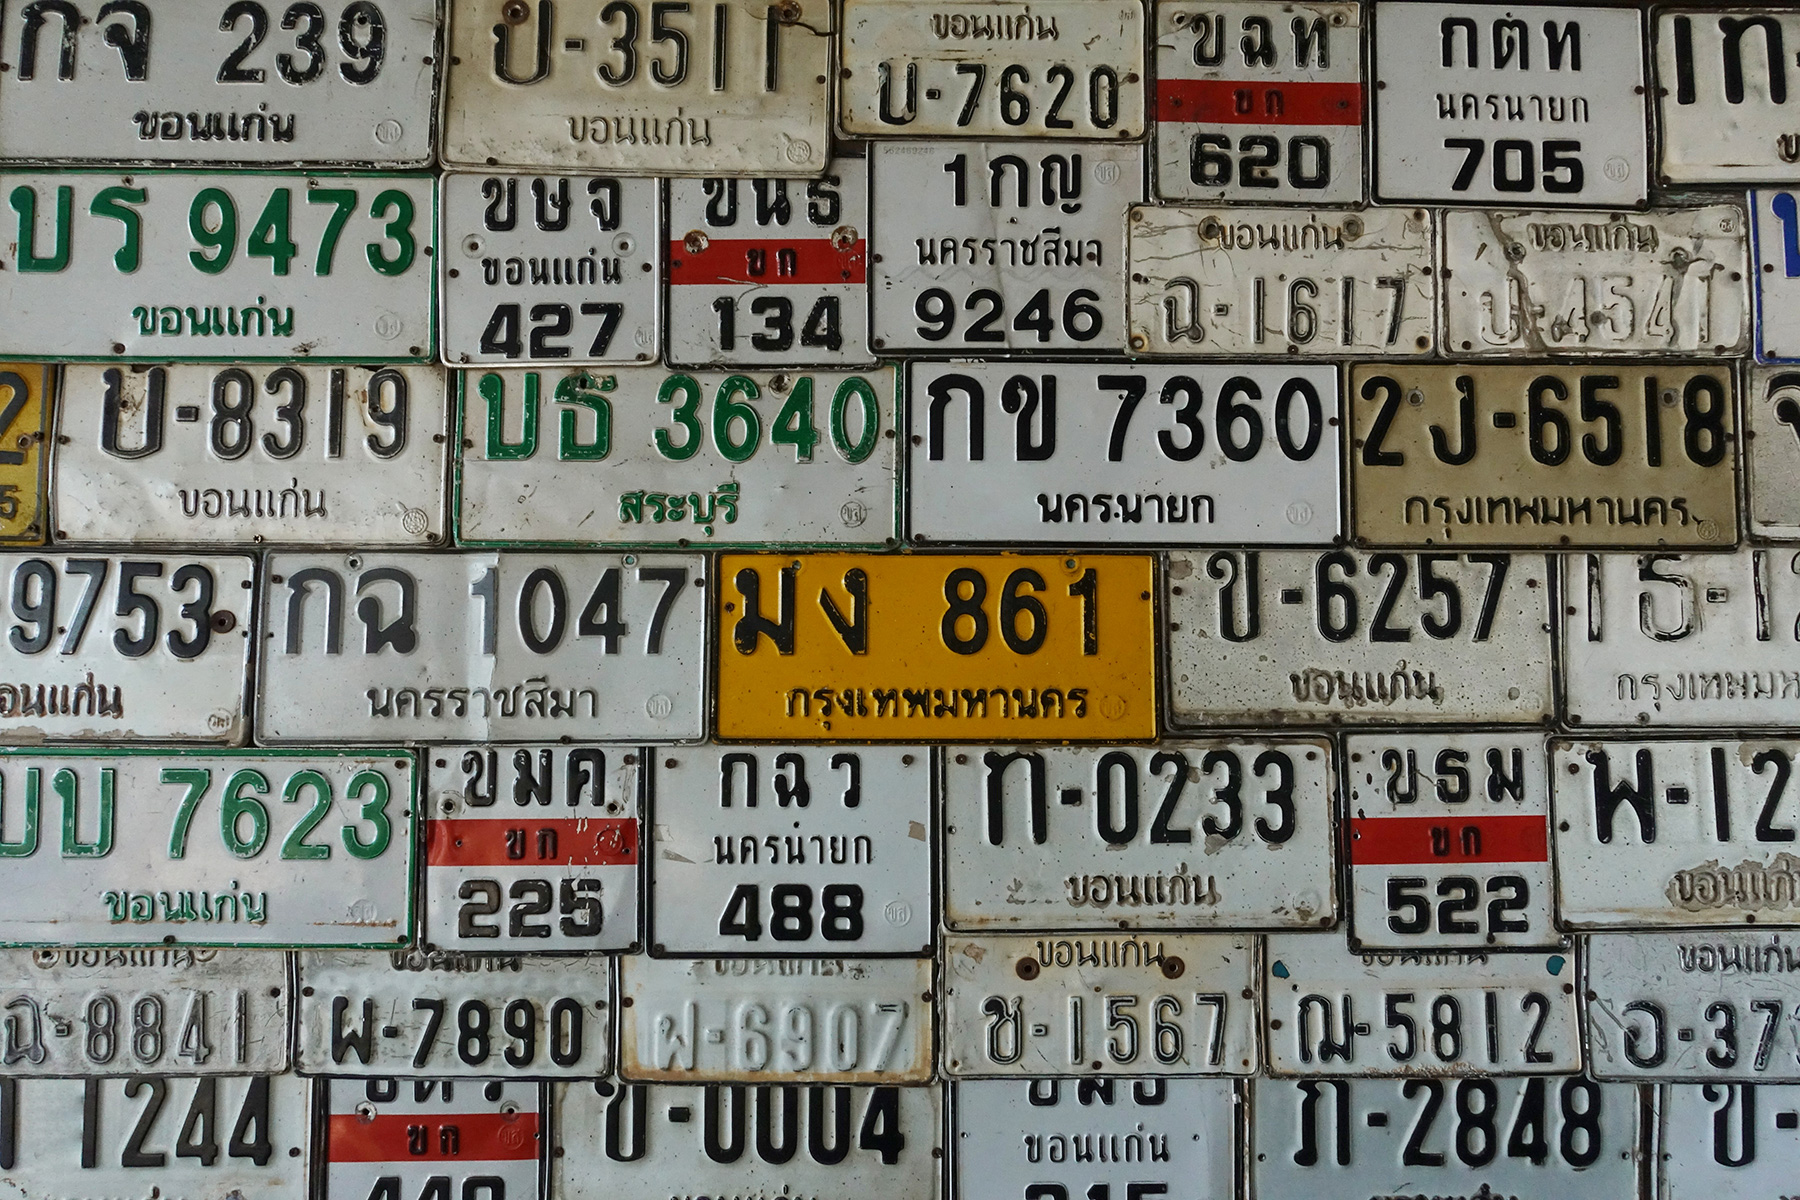 Old Thai license plates displayed on the wall.